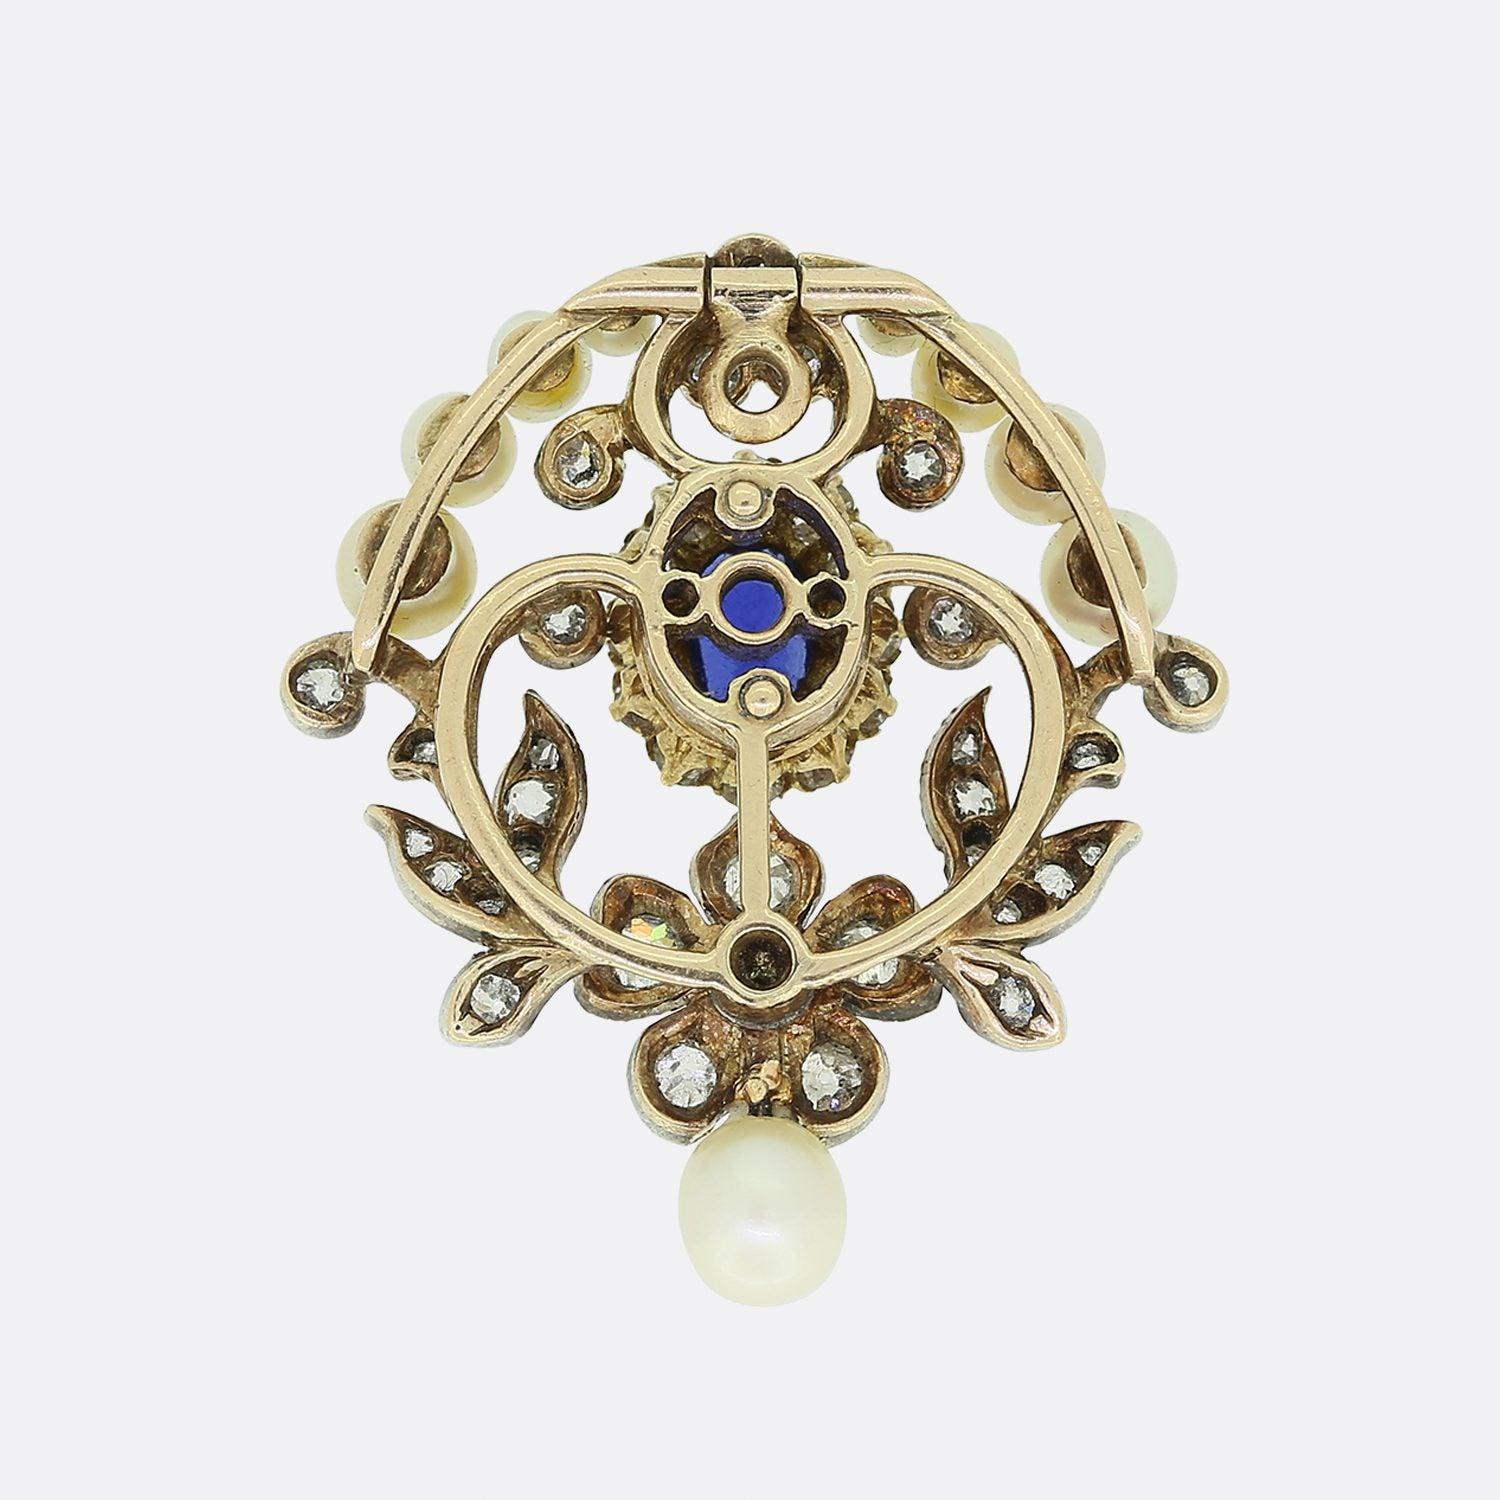 This is a truly magnificent antique piece from the Victorian era.  Firstly, an oval shaped sapphire possessing a highly desirable rich blue hue sits at the centre and is encompassed by a cluster of circulating old cut diamonds. This pendant's floral